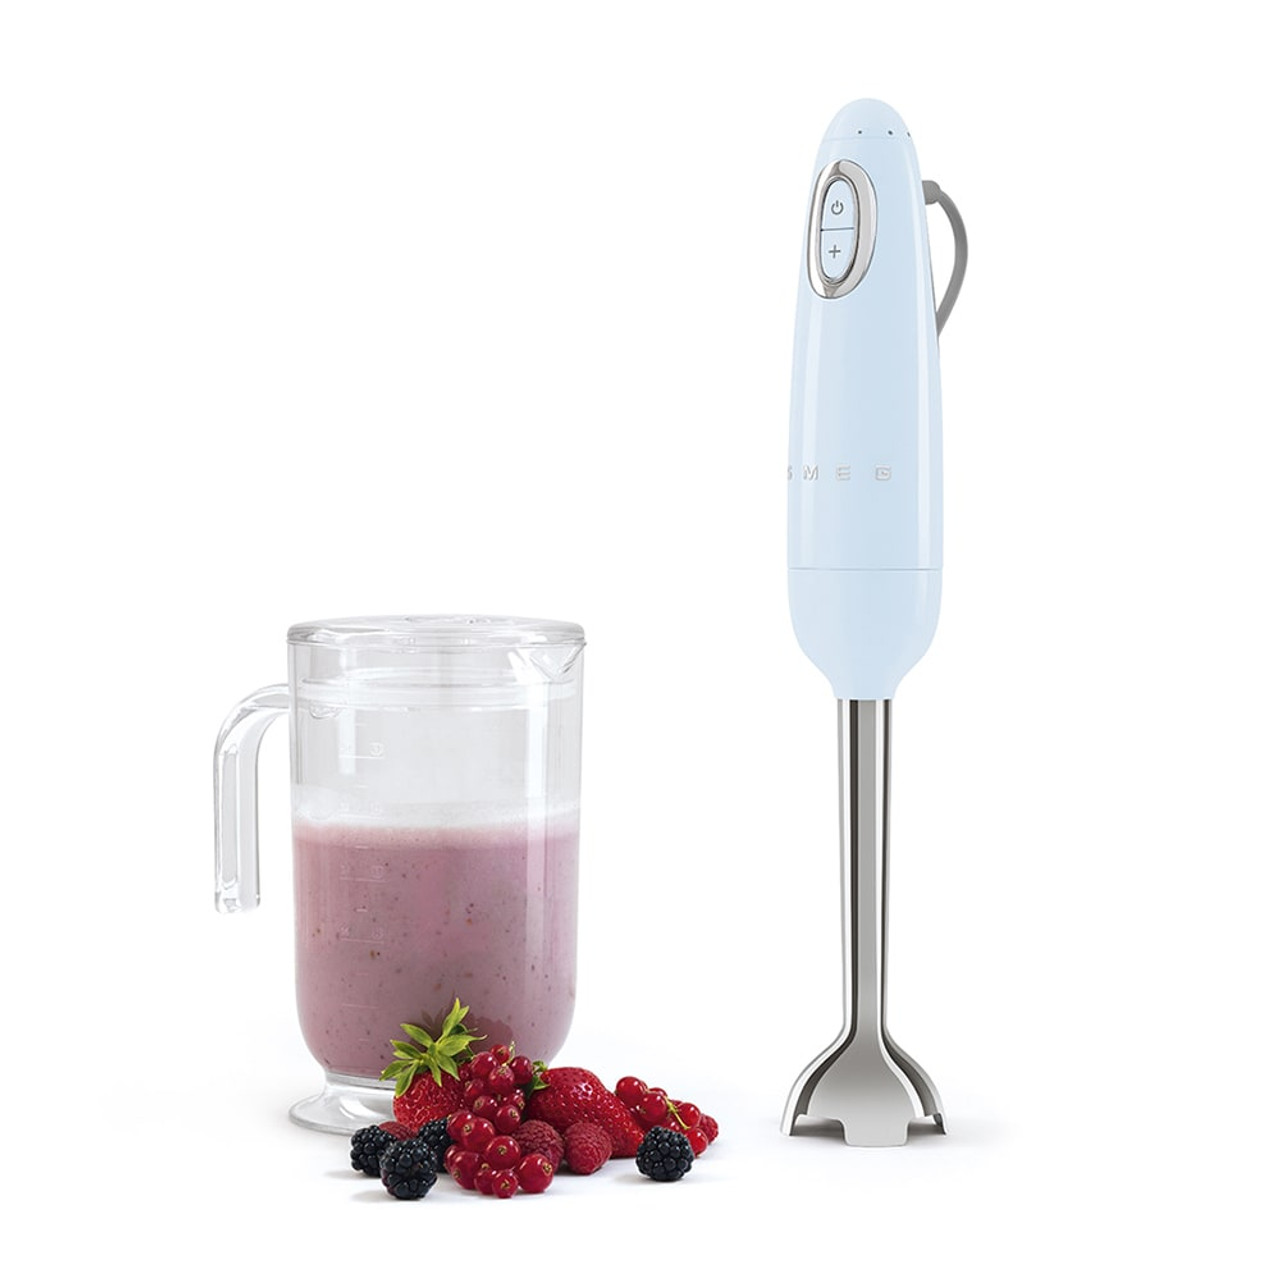 Smeg Hand Blender with Premium Packaging - Champagne Giftbox - 20268176